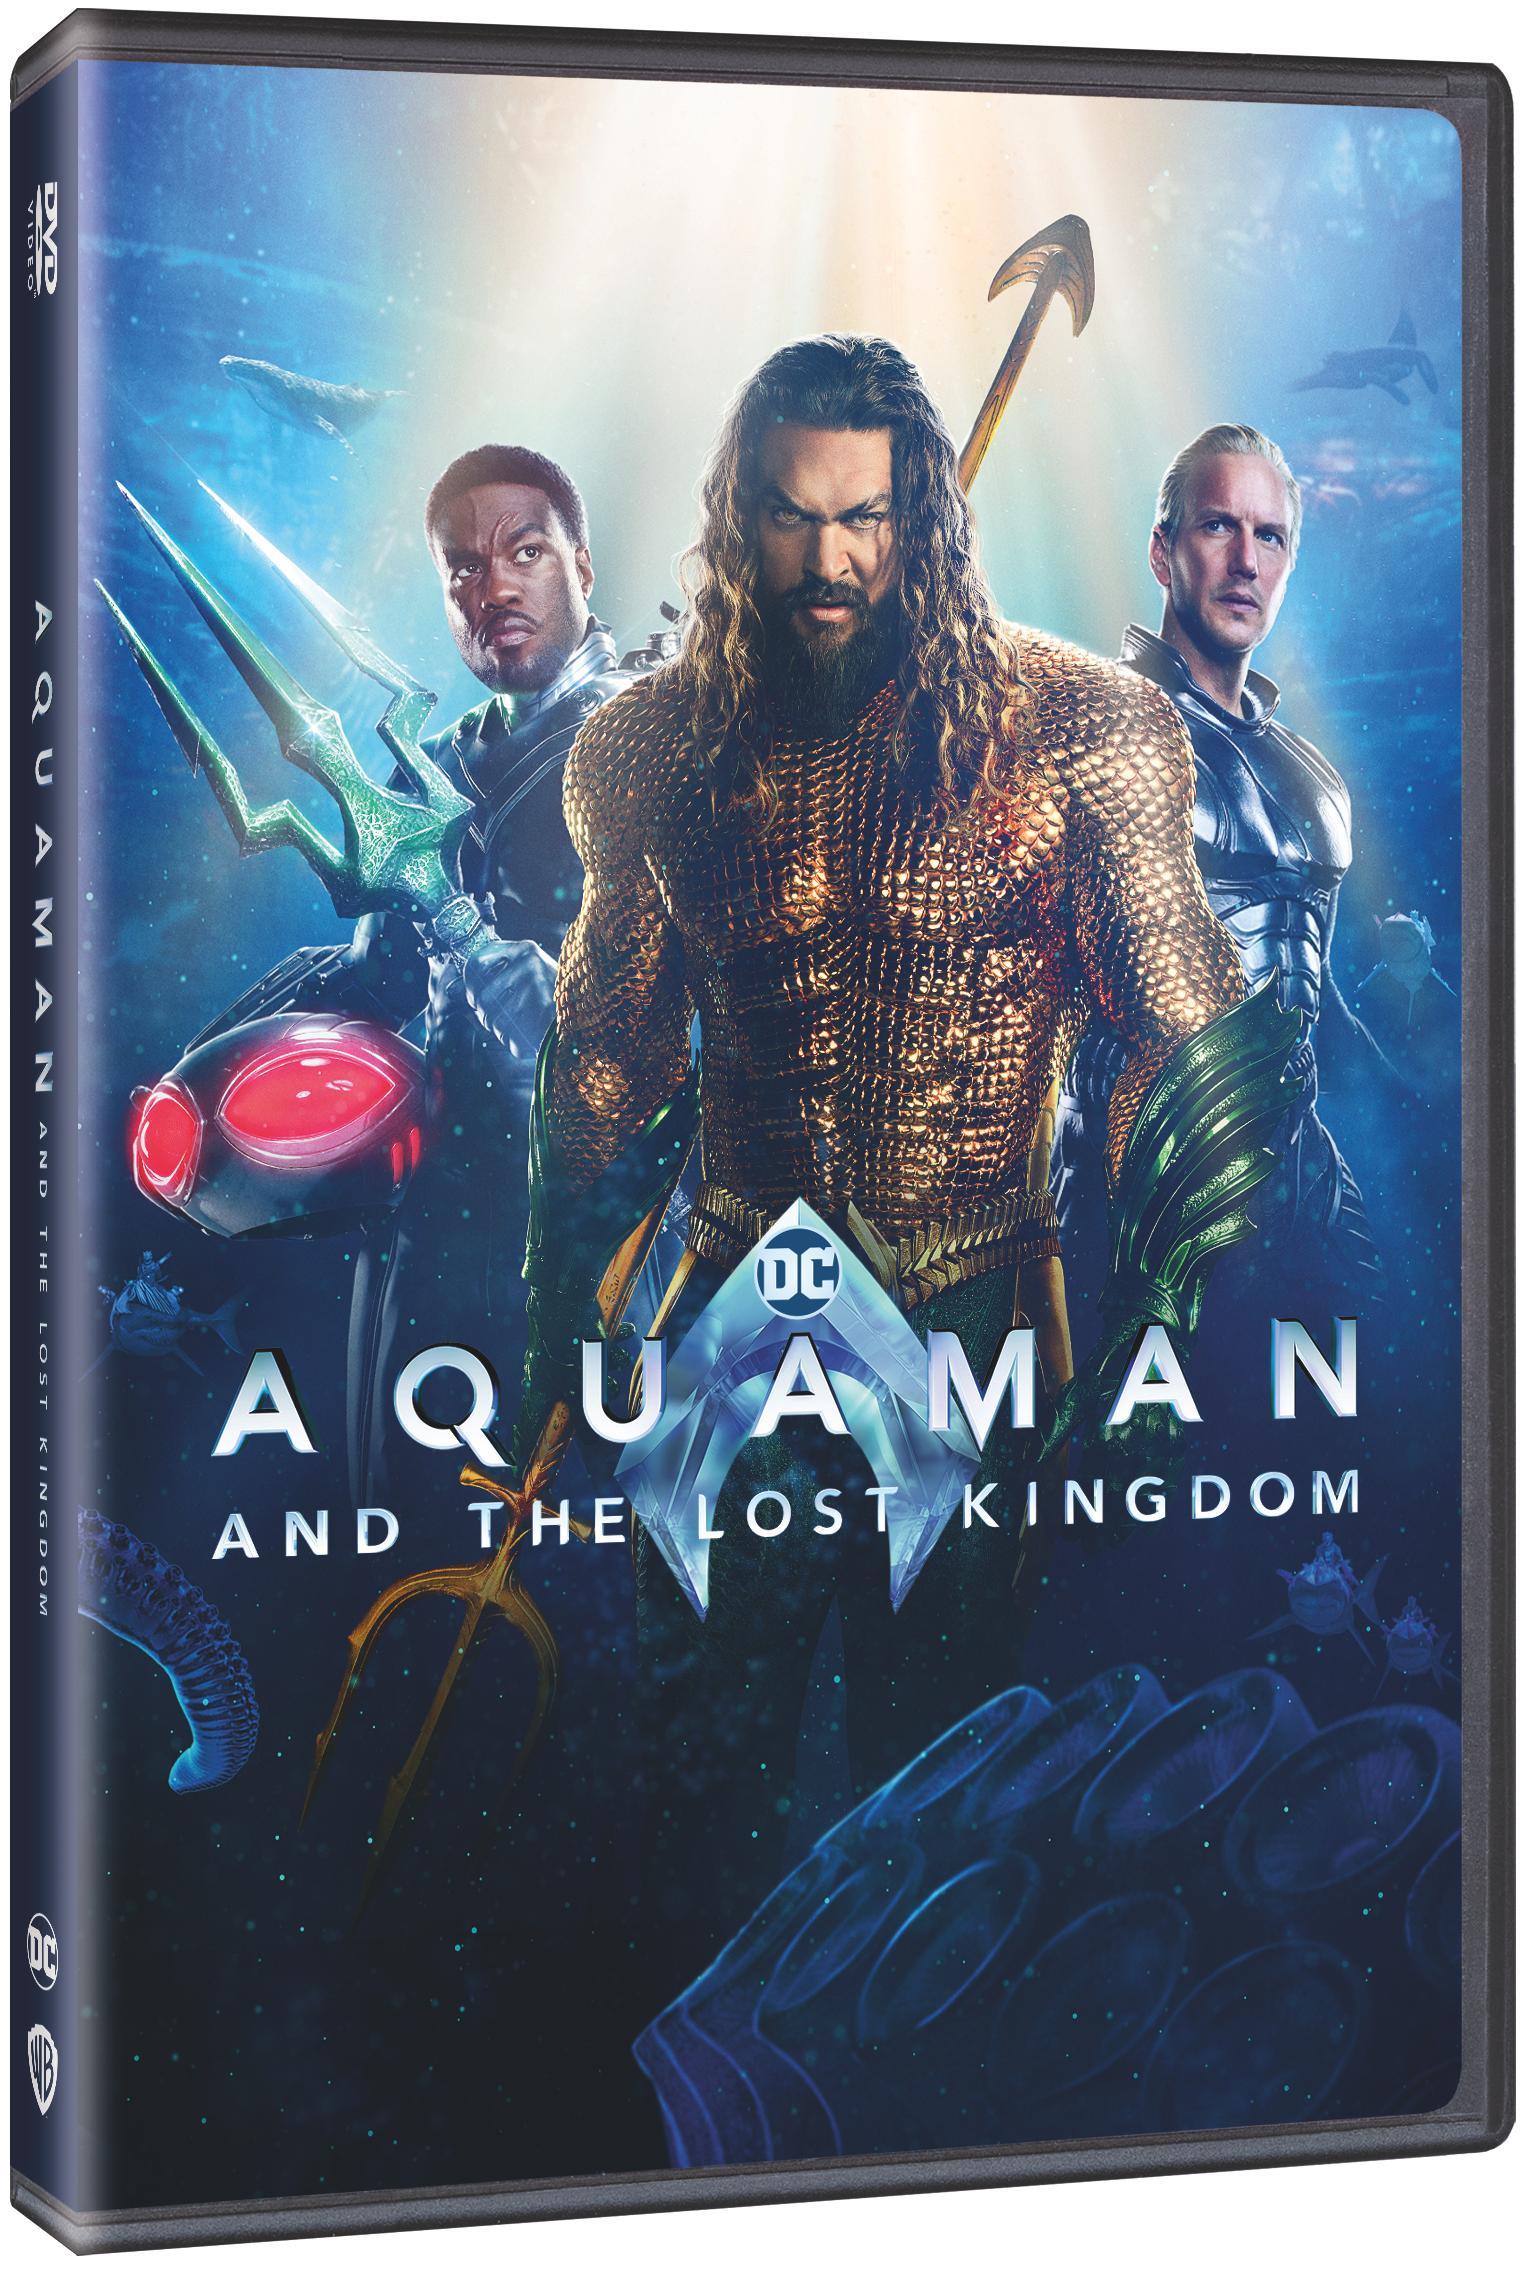 Aquaman and the Lost Kingdom (DVD) - image 2 of 7